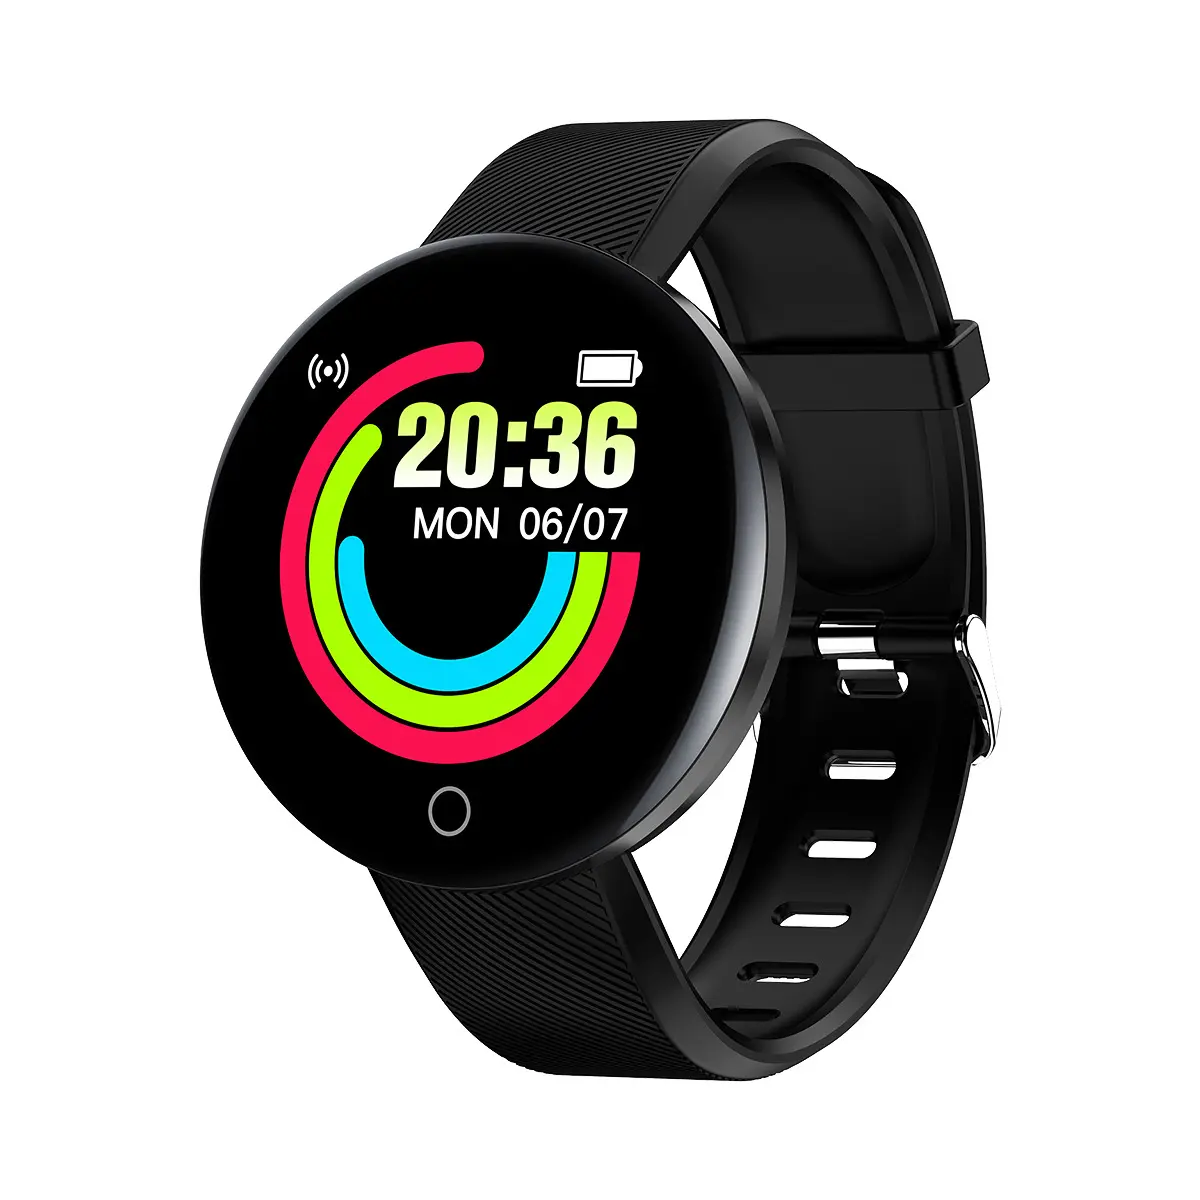 Smart Watch High Quality Smart Watch 2021 With HD LCD Screen D18 Android Smart Watch For Smartwatches